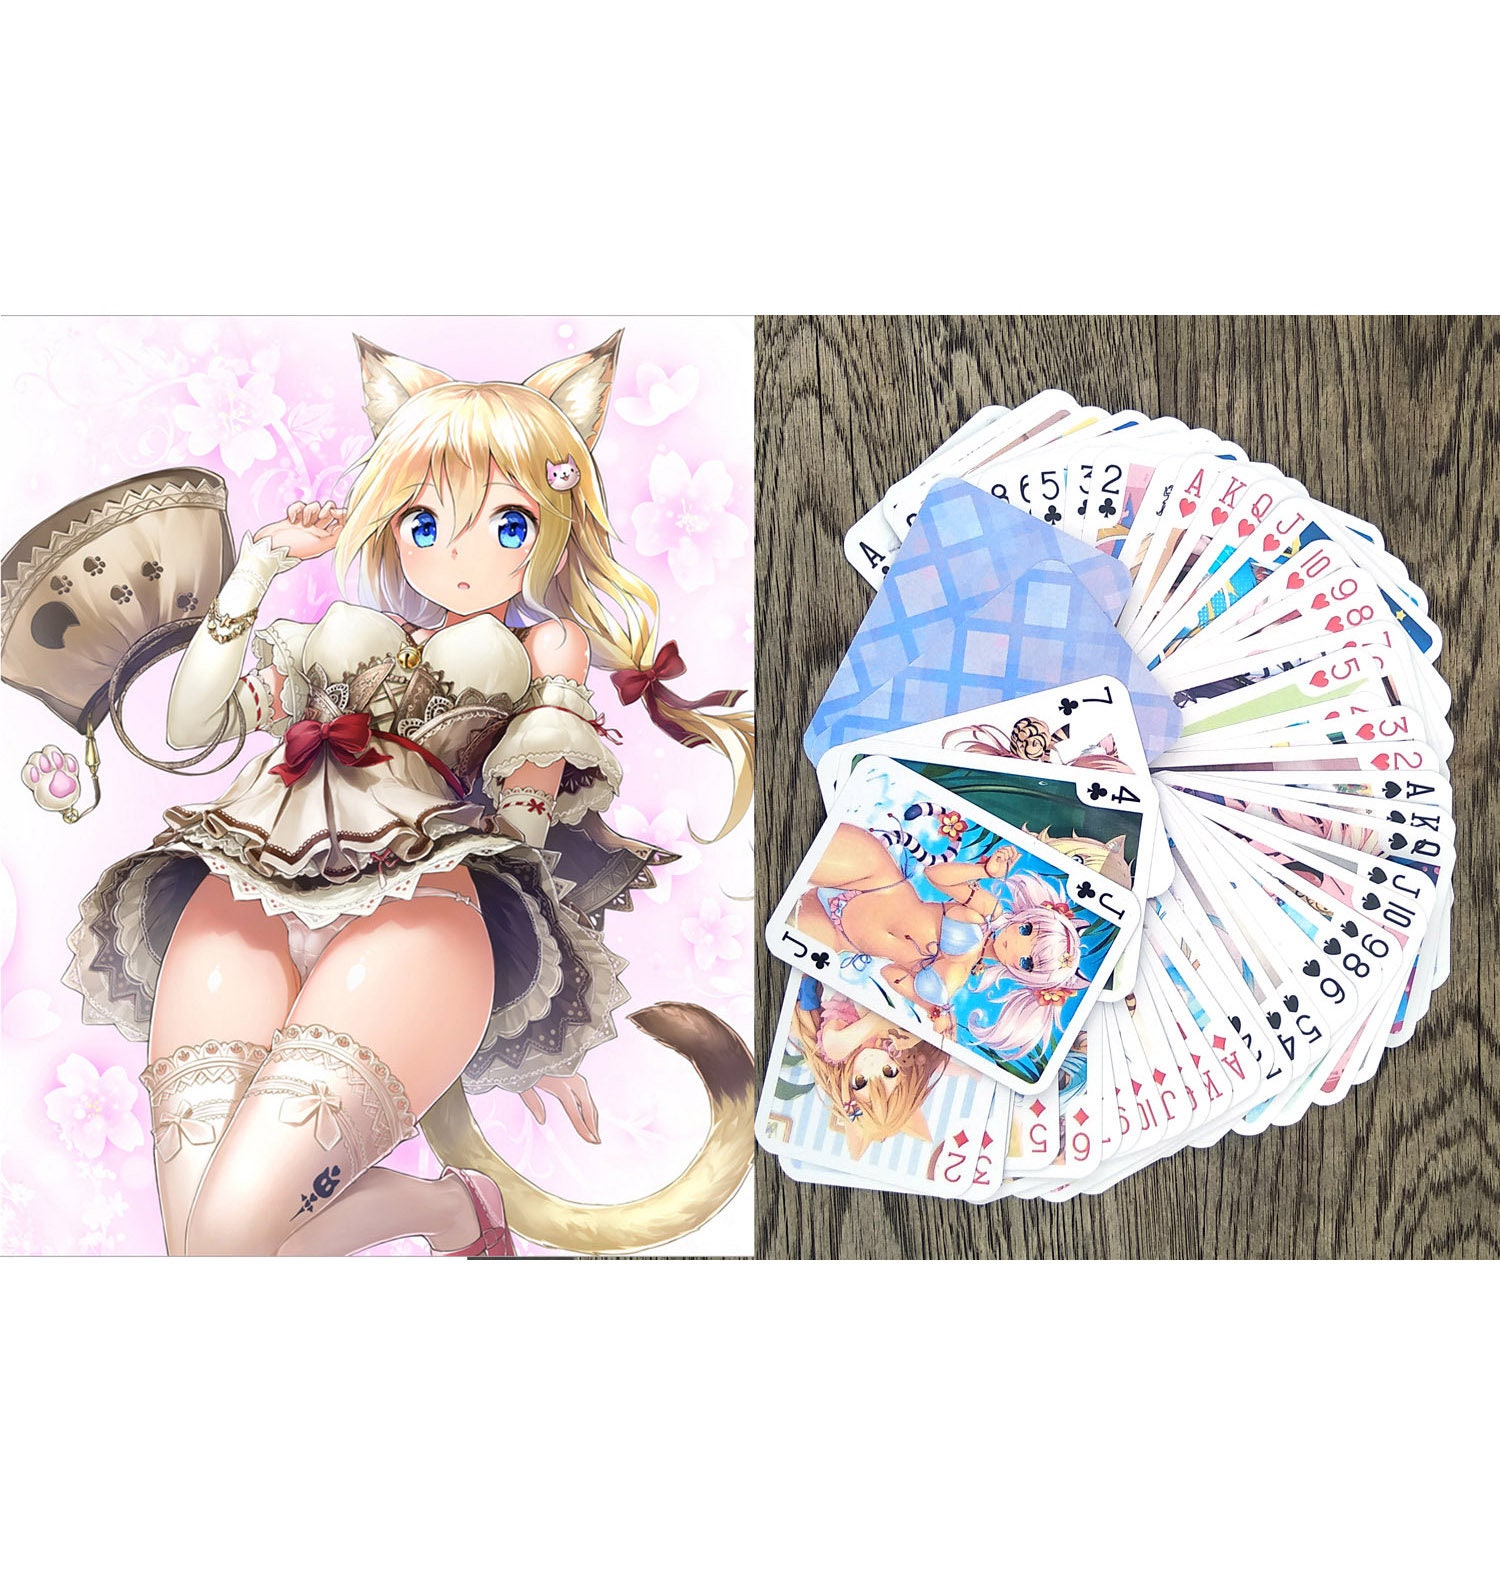 Hentai Anime Cat Girls Naked - ANIME Playing Cards poker Deck 54 Cards All Different Kawaii - Etsy